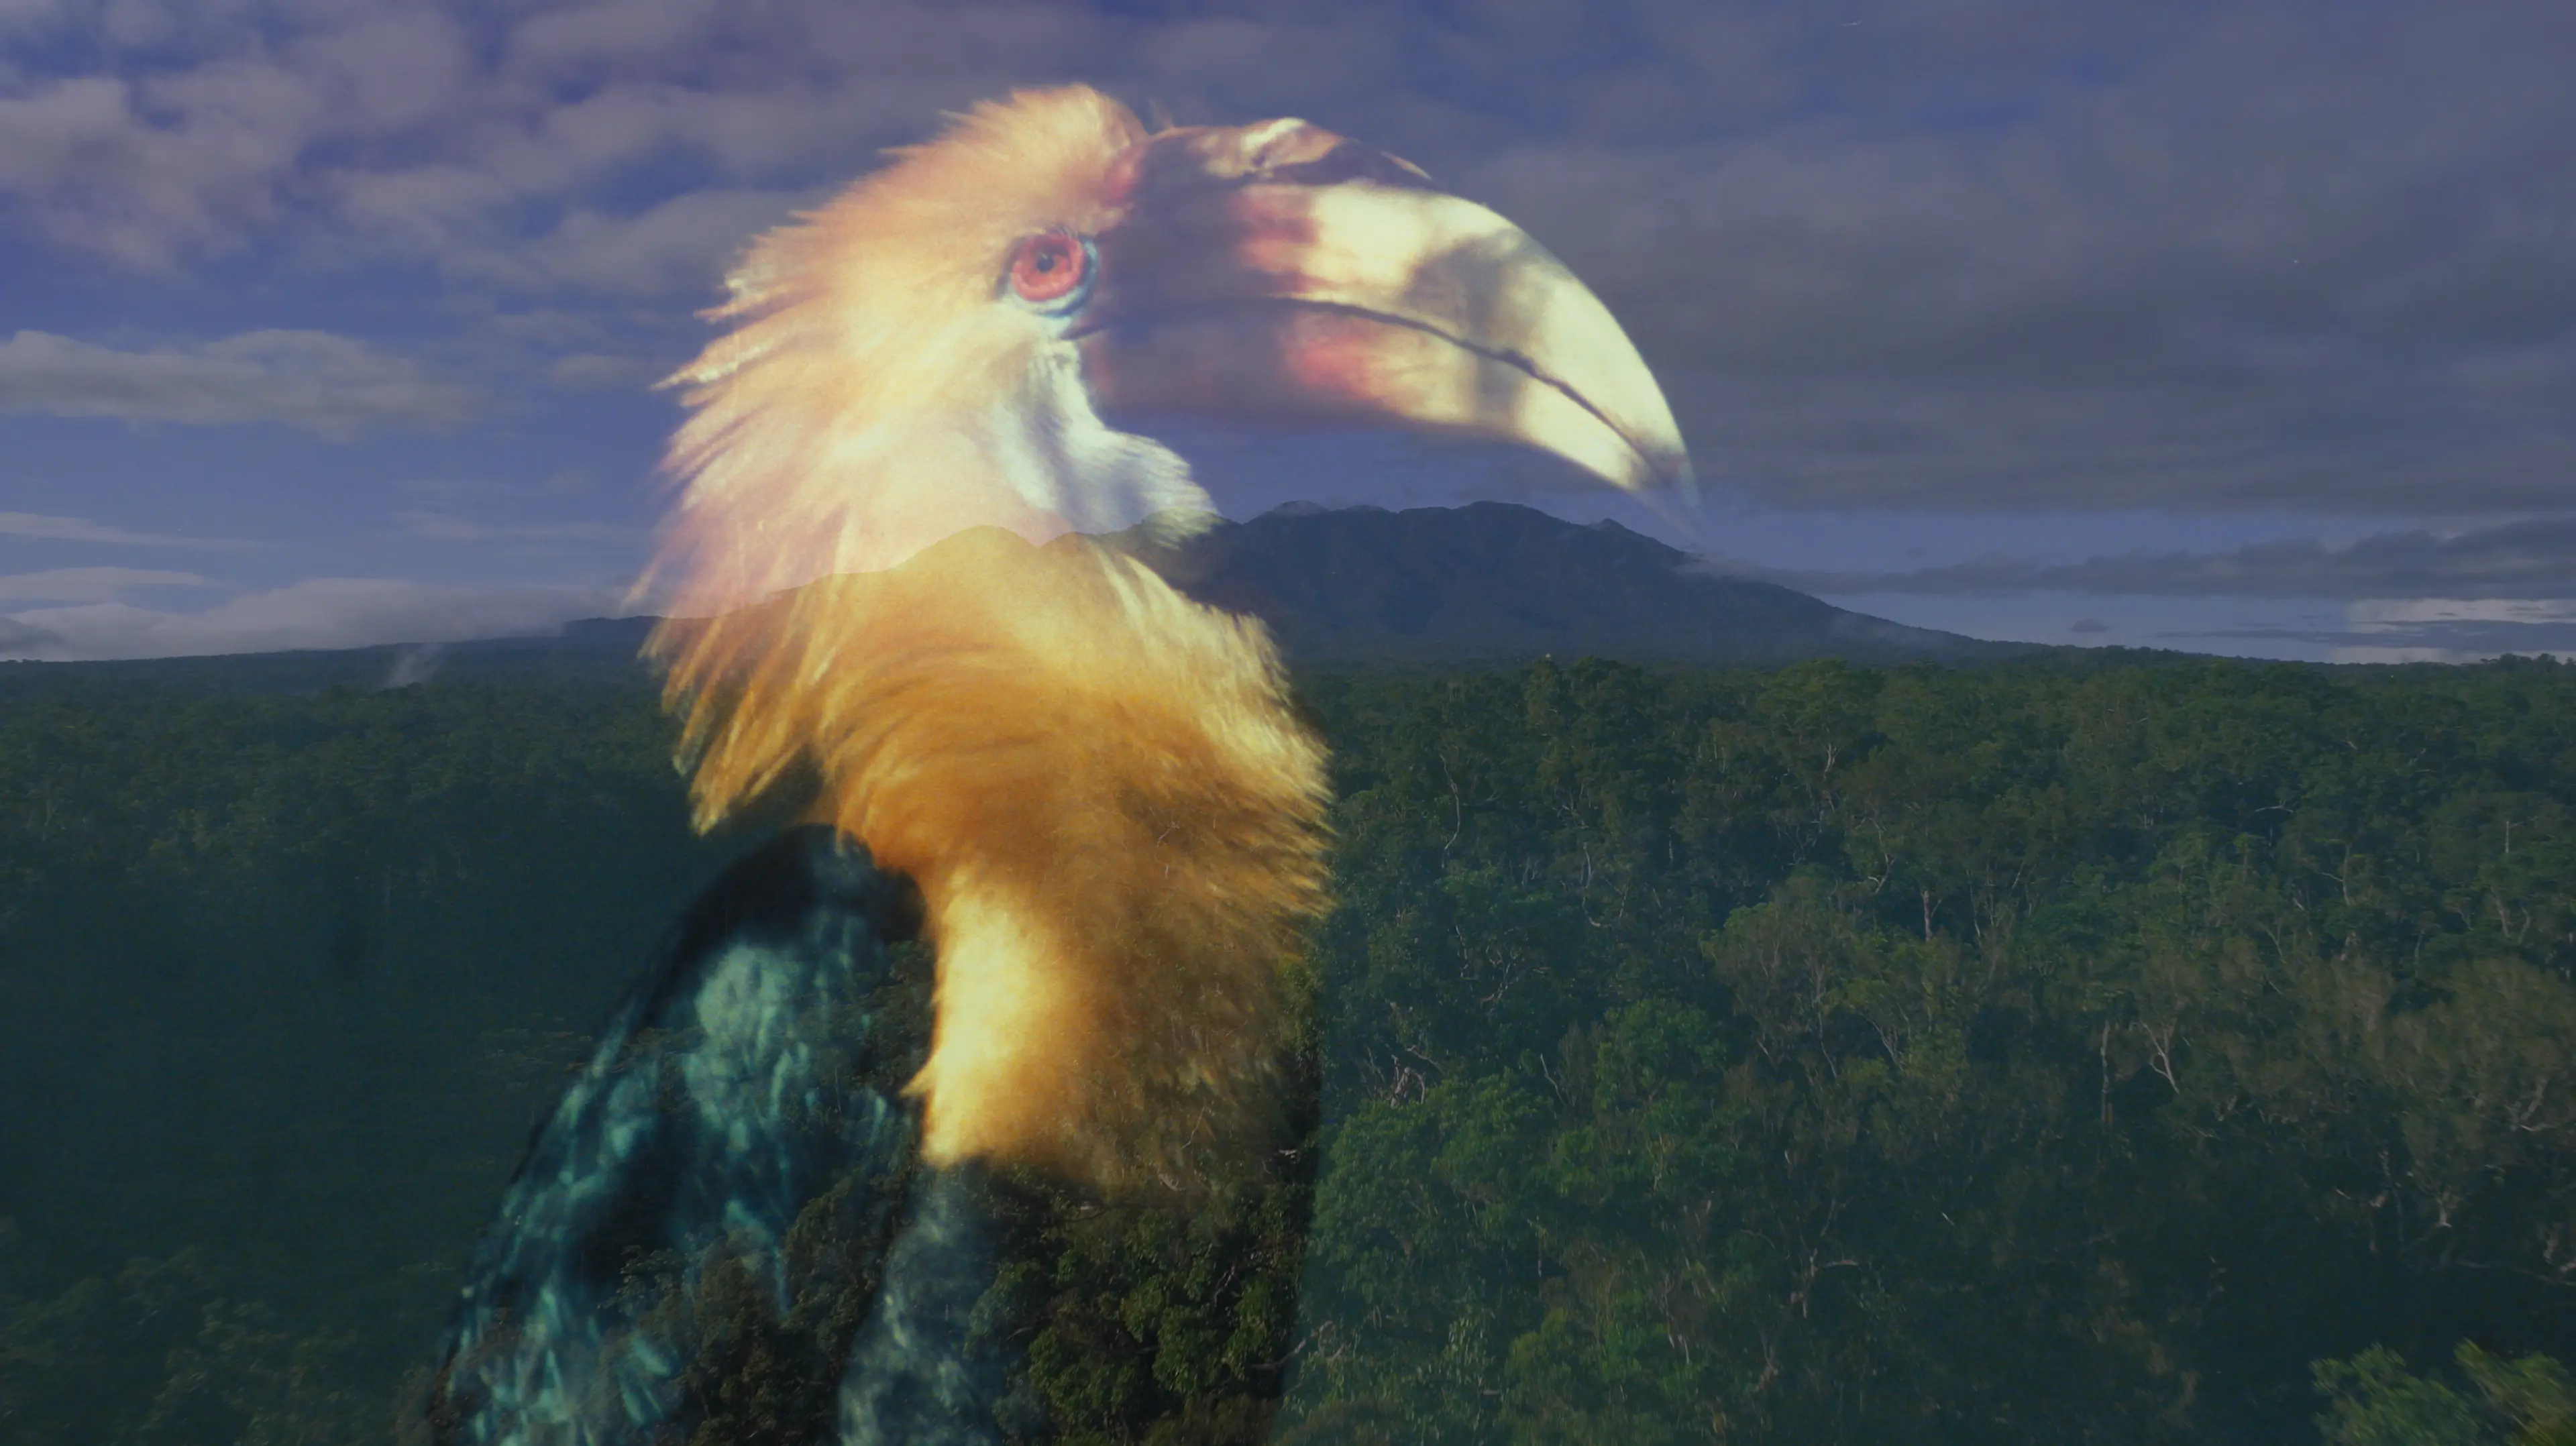 Still from the documentary with superimposed image of mountain and colorful bird with long beak